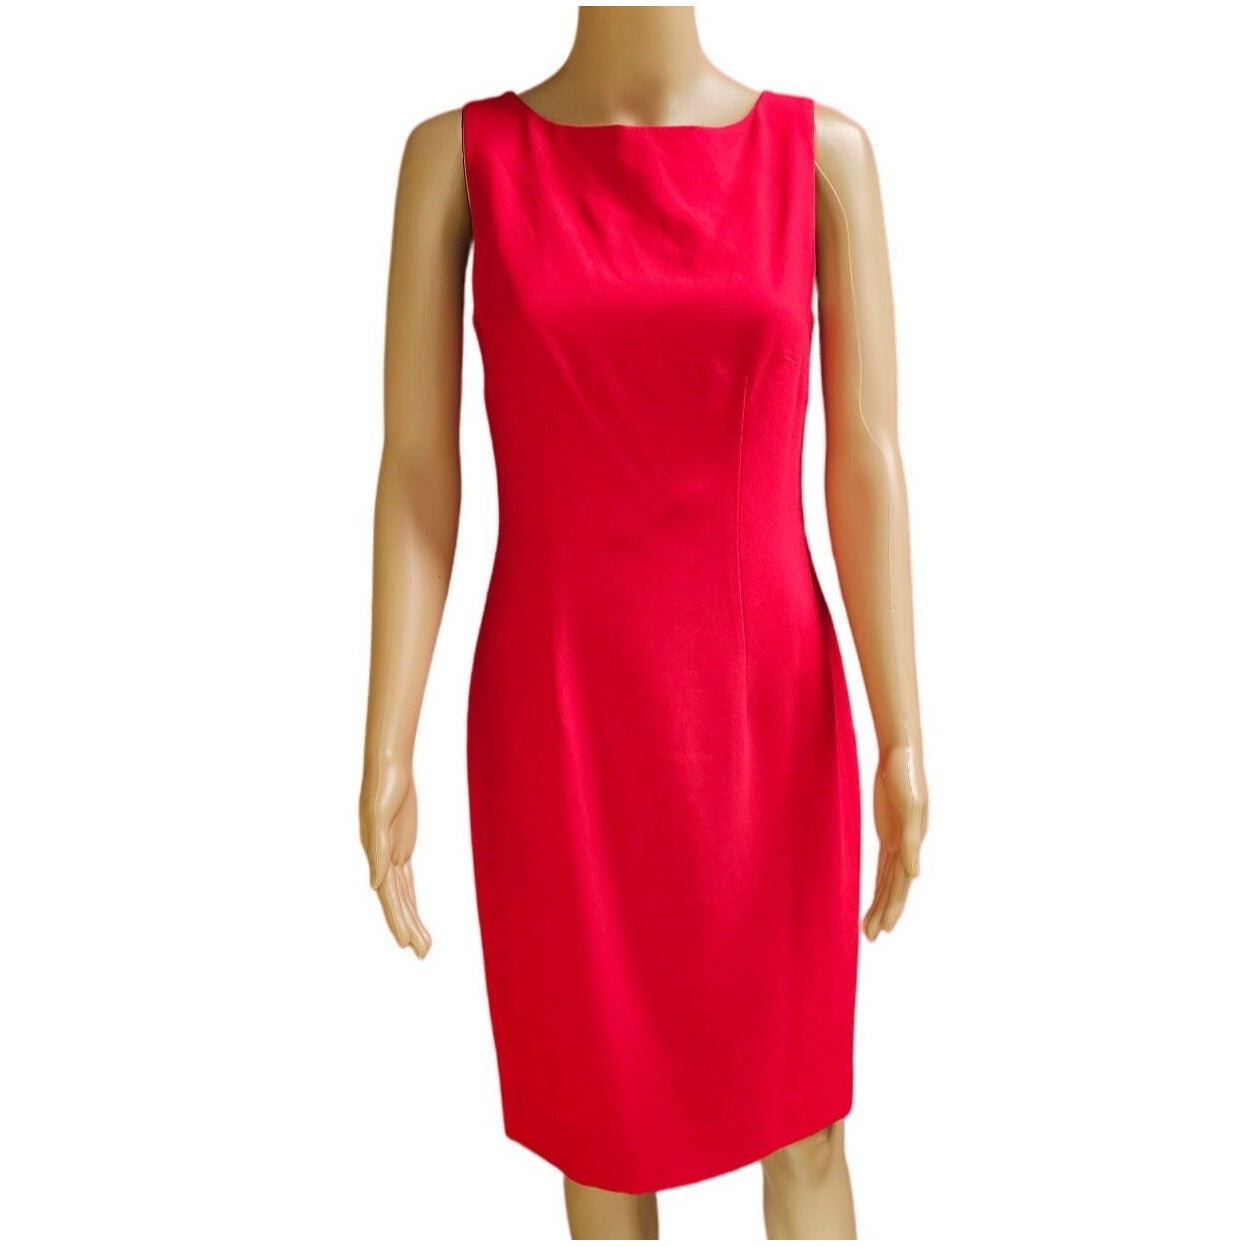 Basic Flattering Simple, Wear Alone or Layered, Red Dress, Size 6